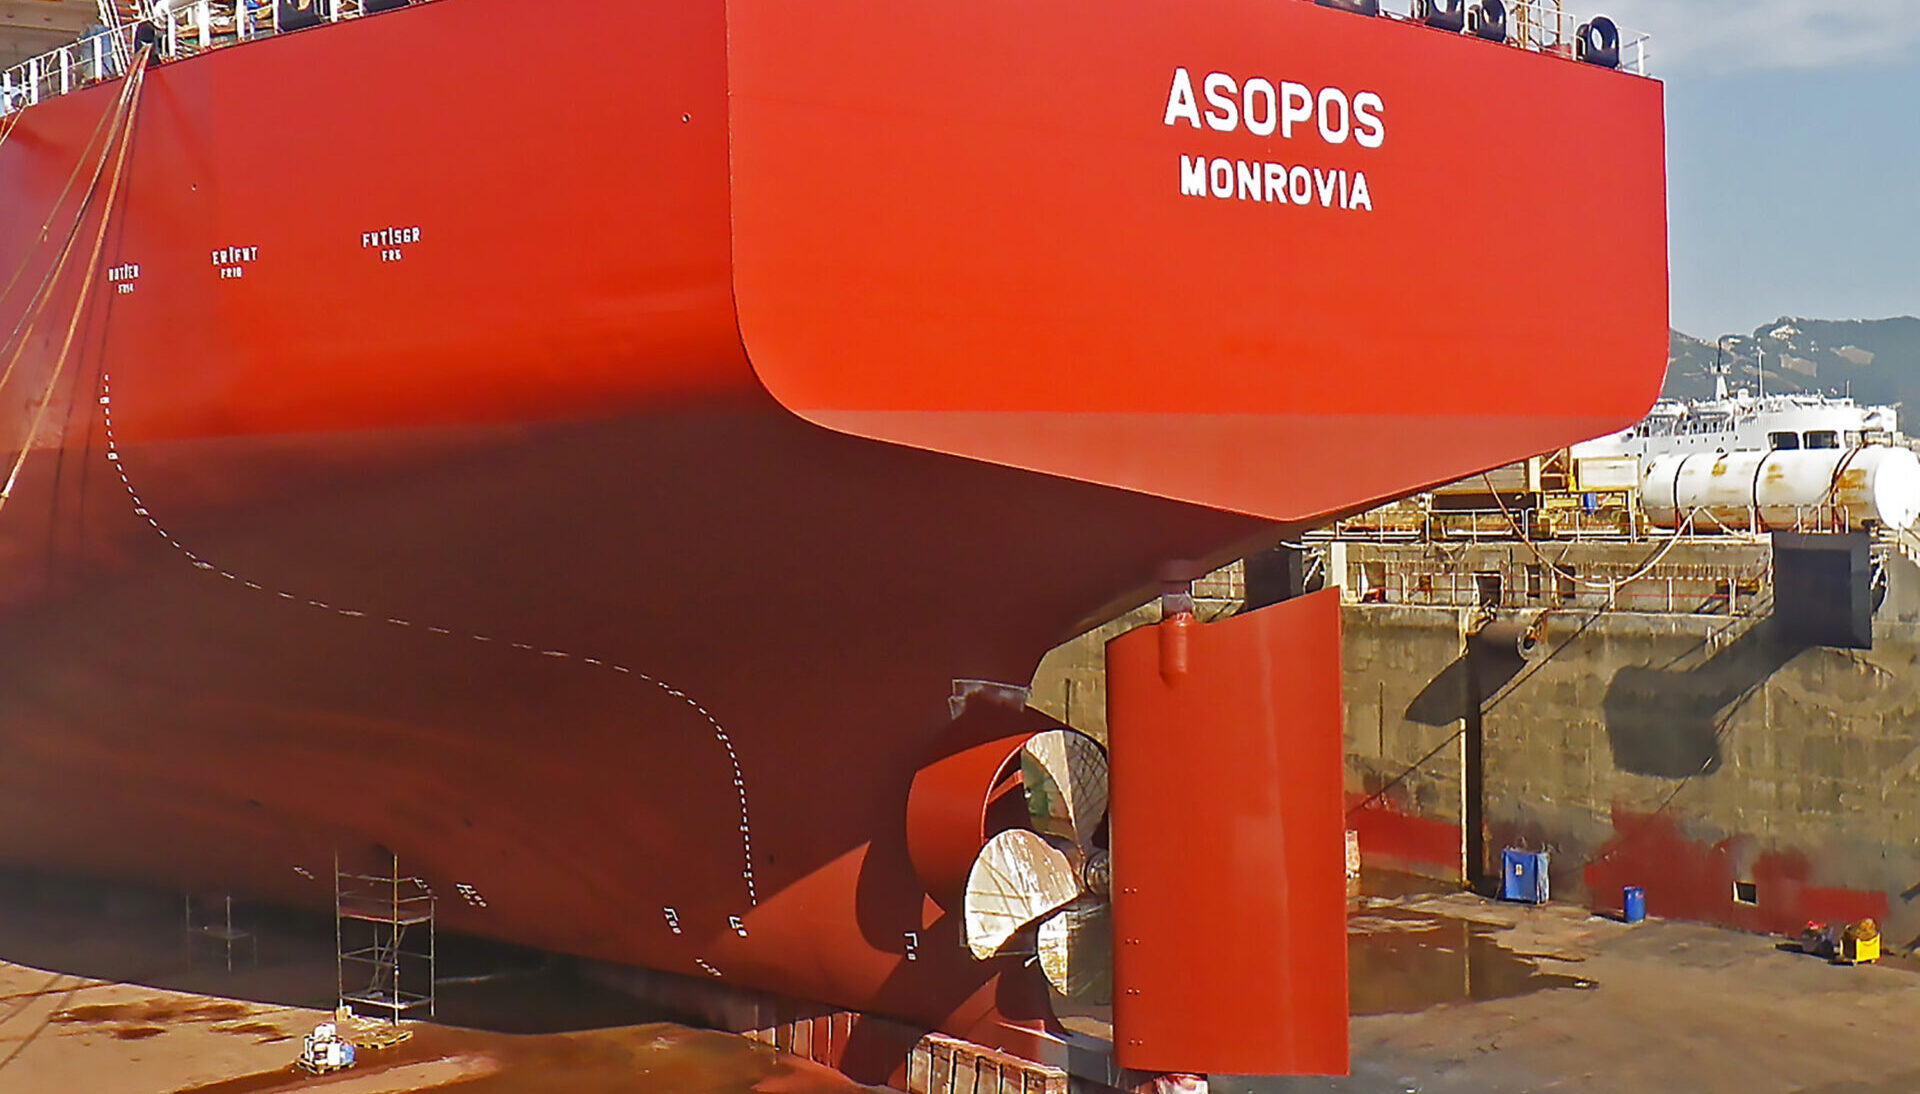 MT Asopos in 2015 after Ecoshield was applied to rudder and nozzle.